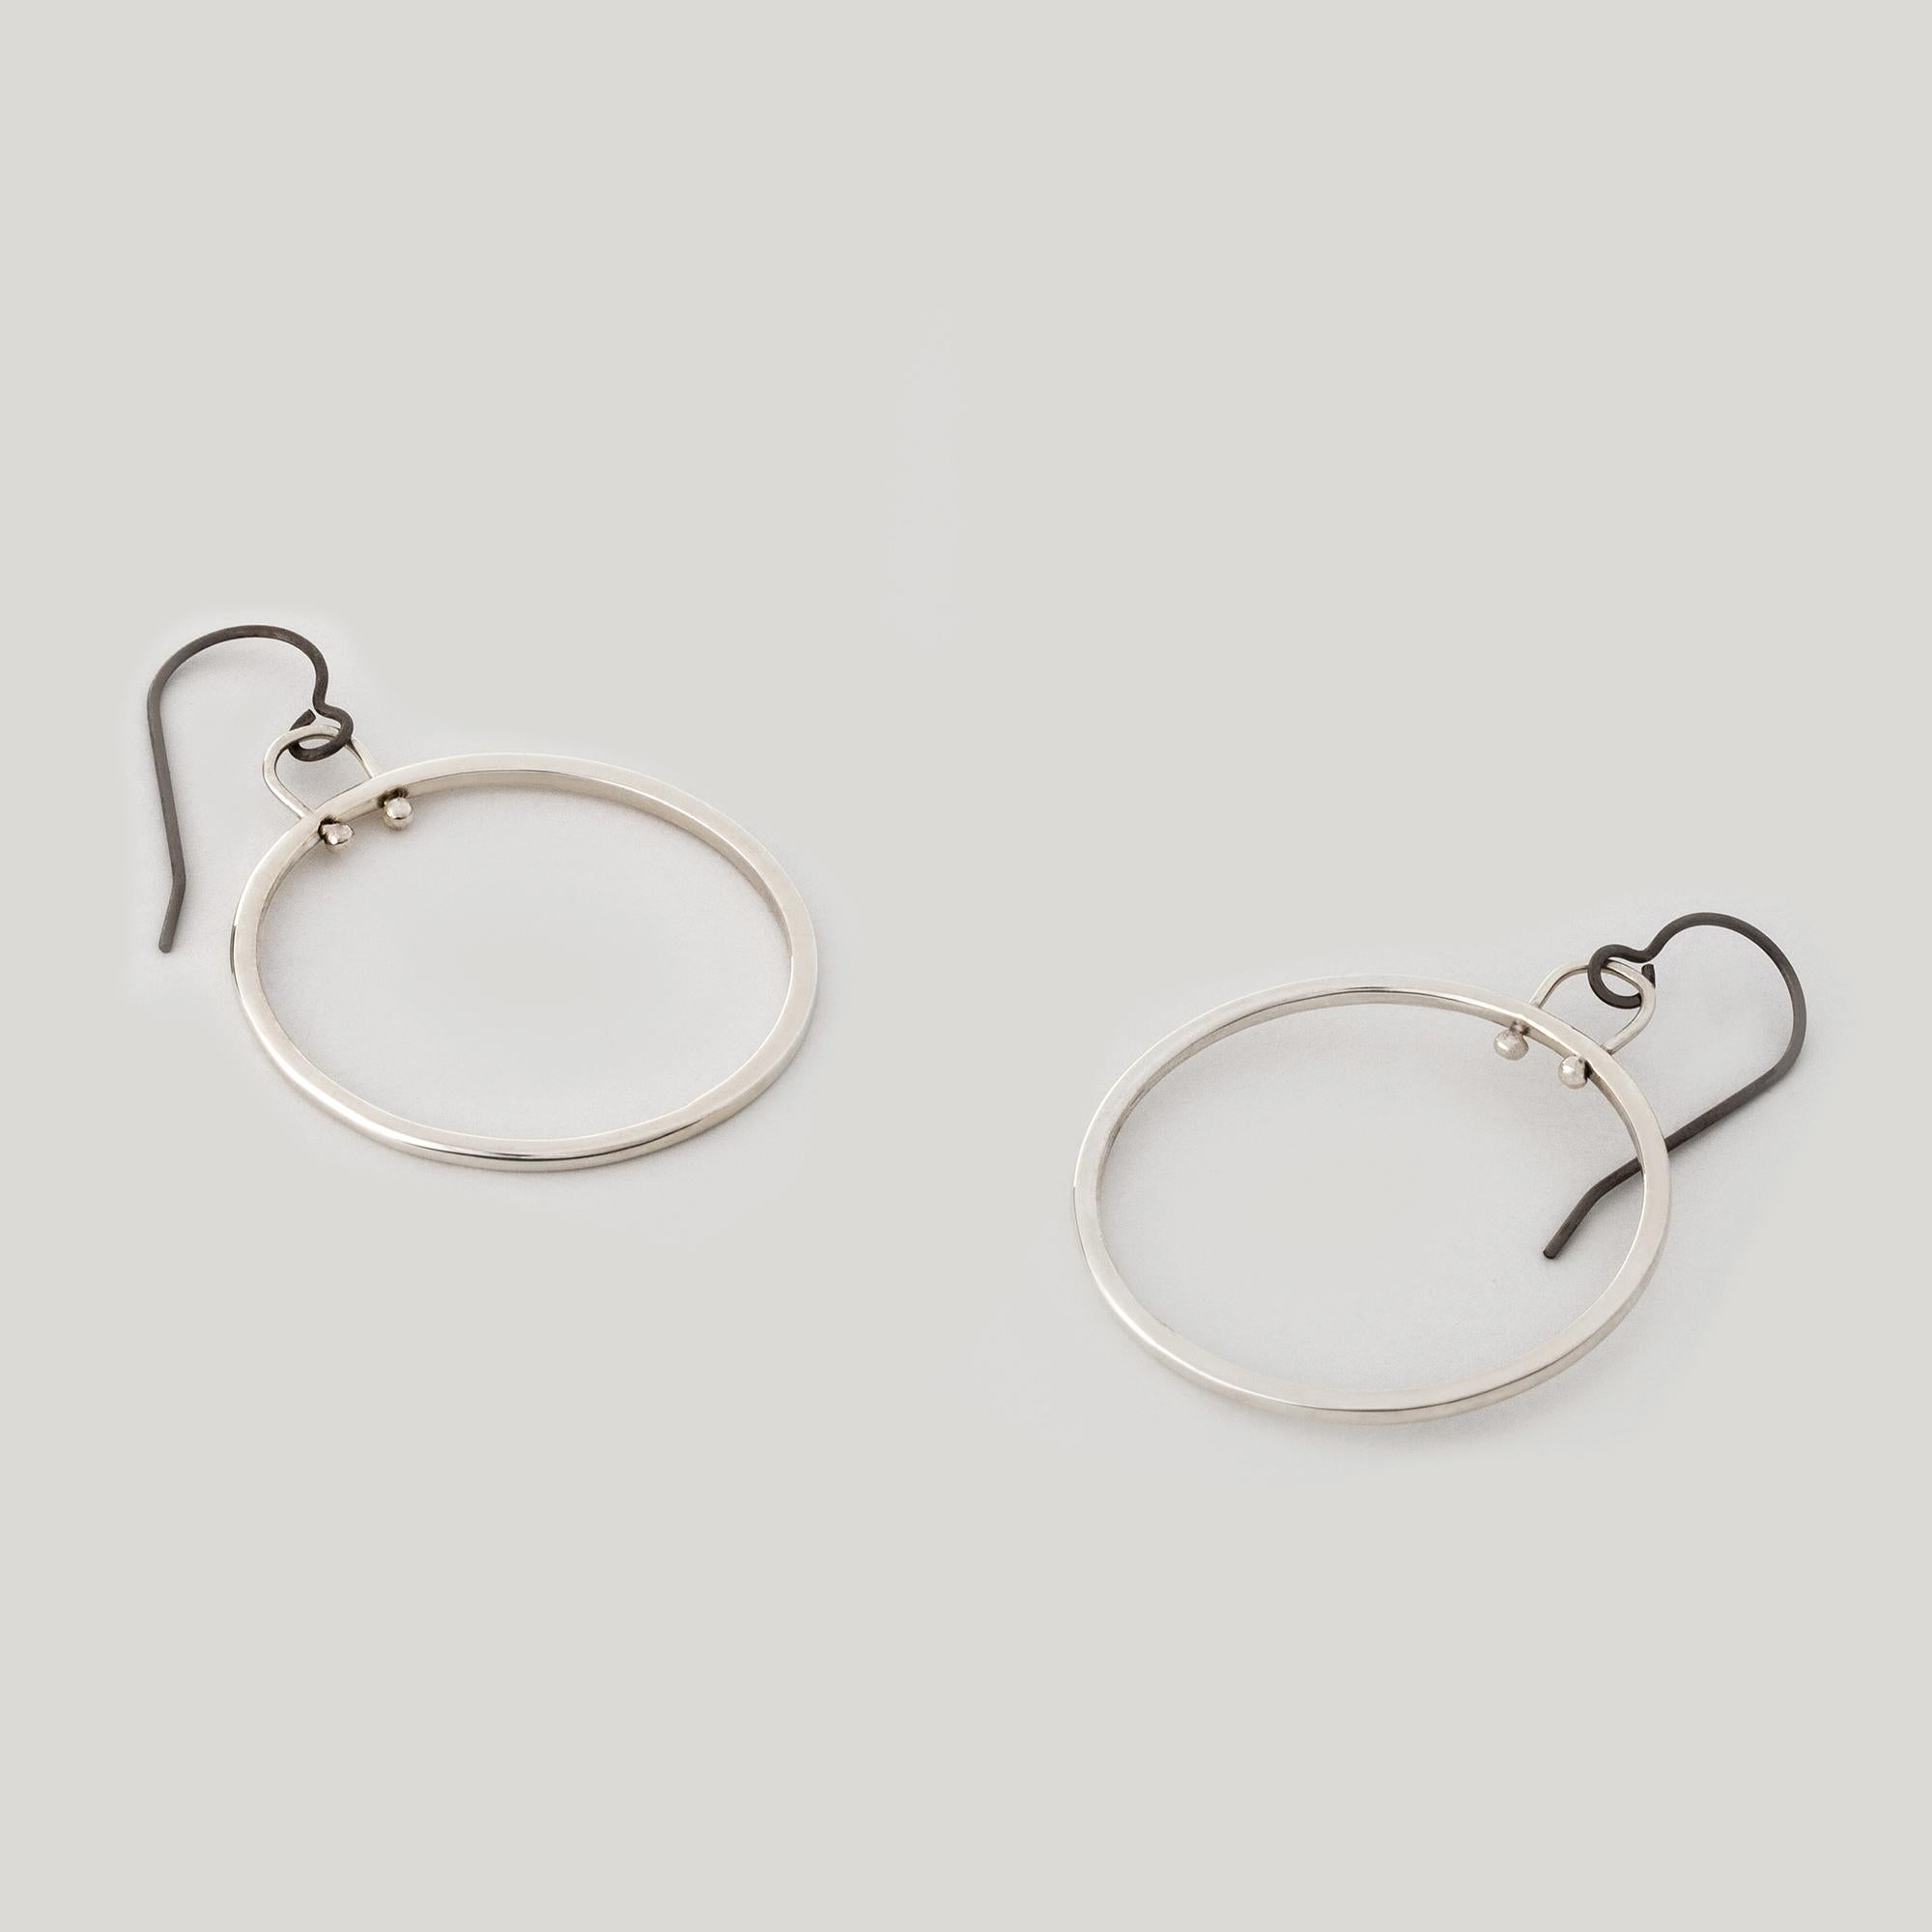 The dynamic hoop, an M. Hisae signature. Round and square wire is joined seamlessly. A beautiful genesis of movement out of static, minimalist forms.

MATERIAL
◘  Approx. 1in round
◘  Large hoop joins round and square wire
◘  Hung on hypo-allergenic